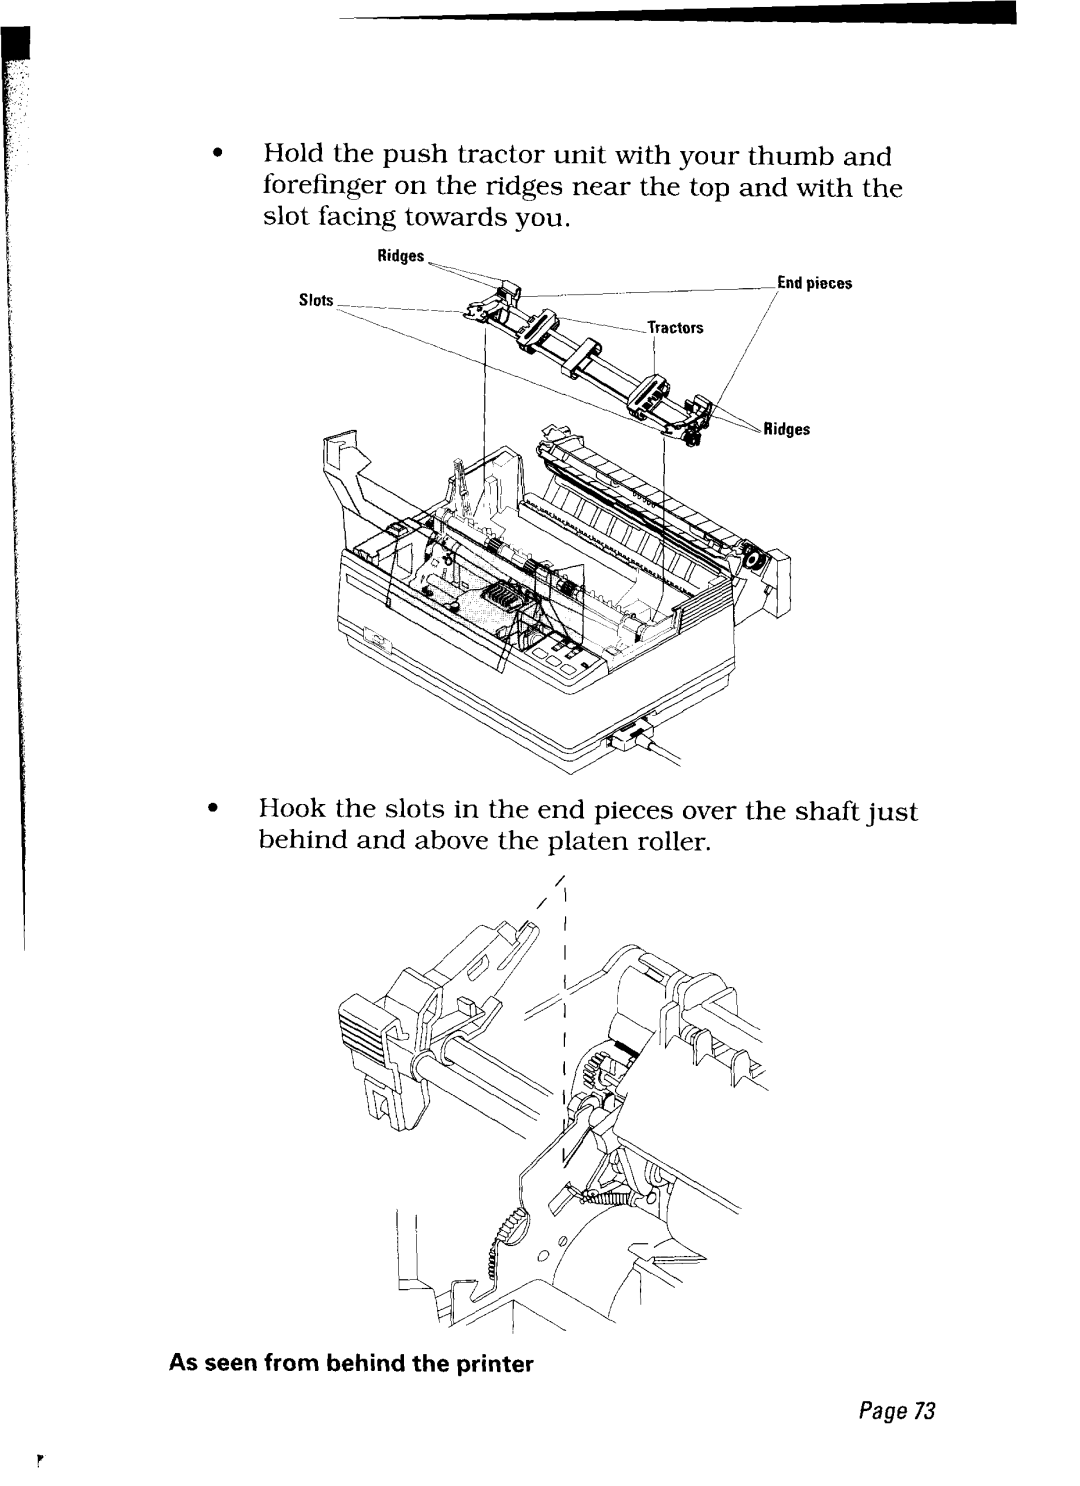 Star Micronics LC24-30 user manual As seen from behind the printer, Ridges 